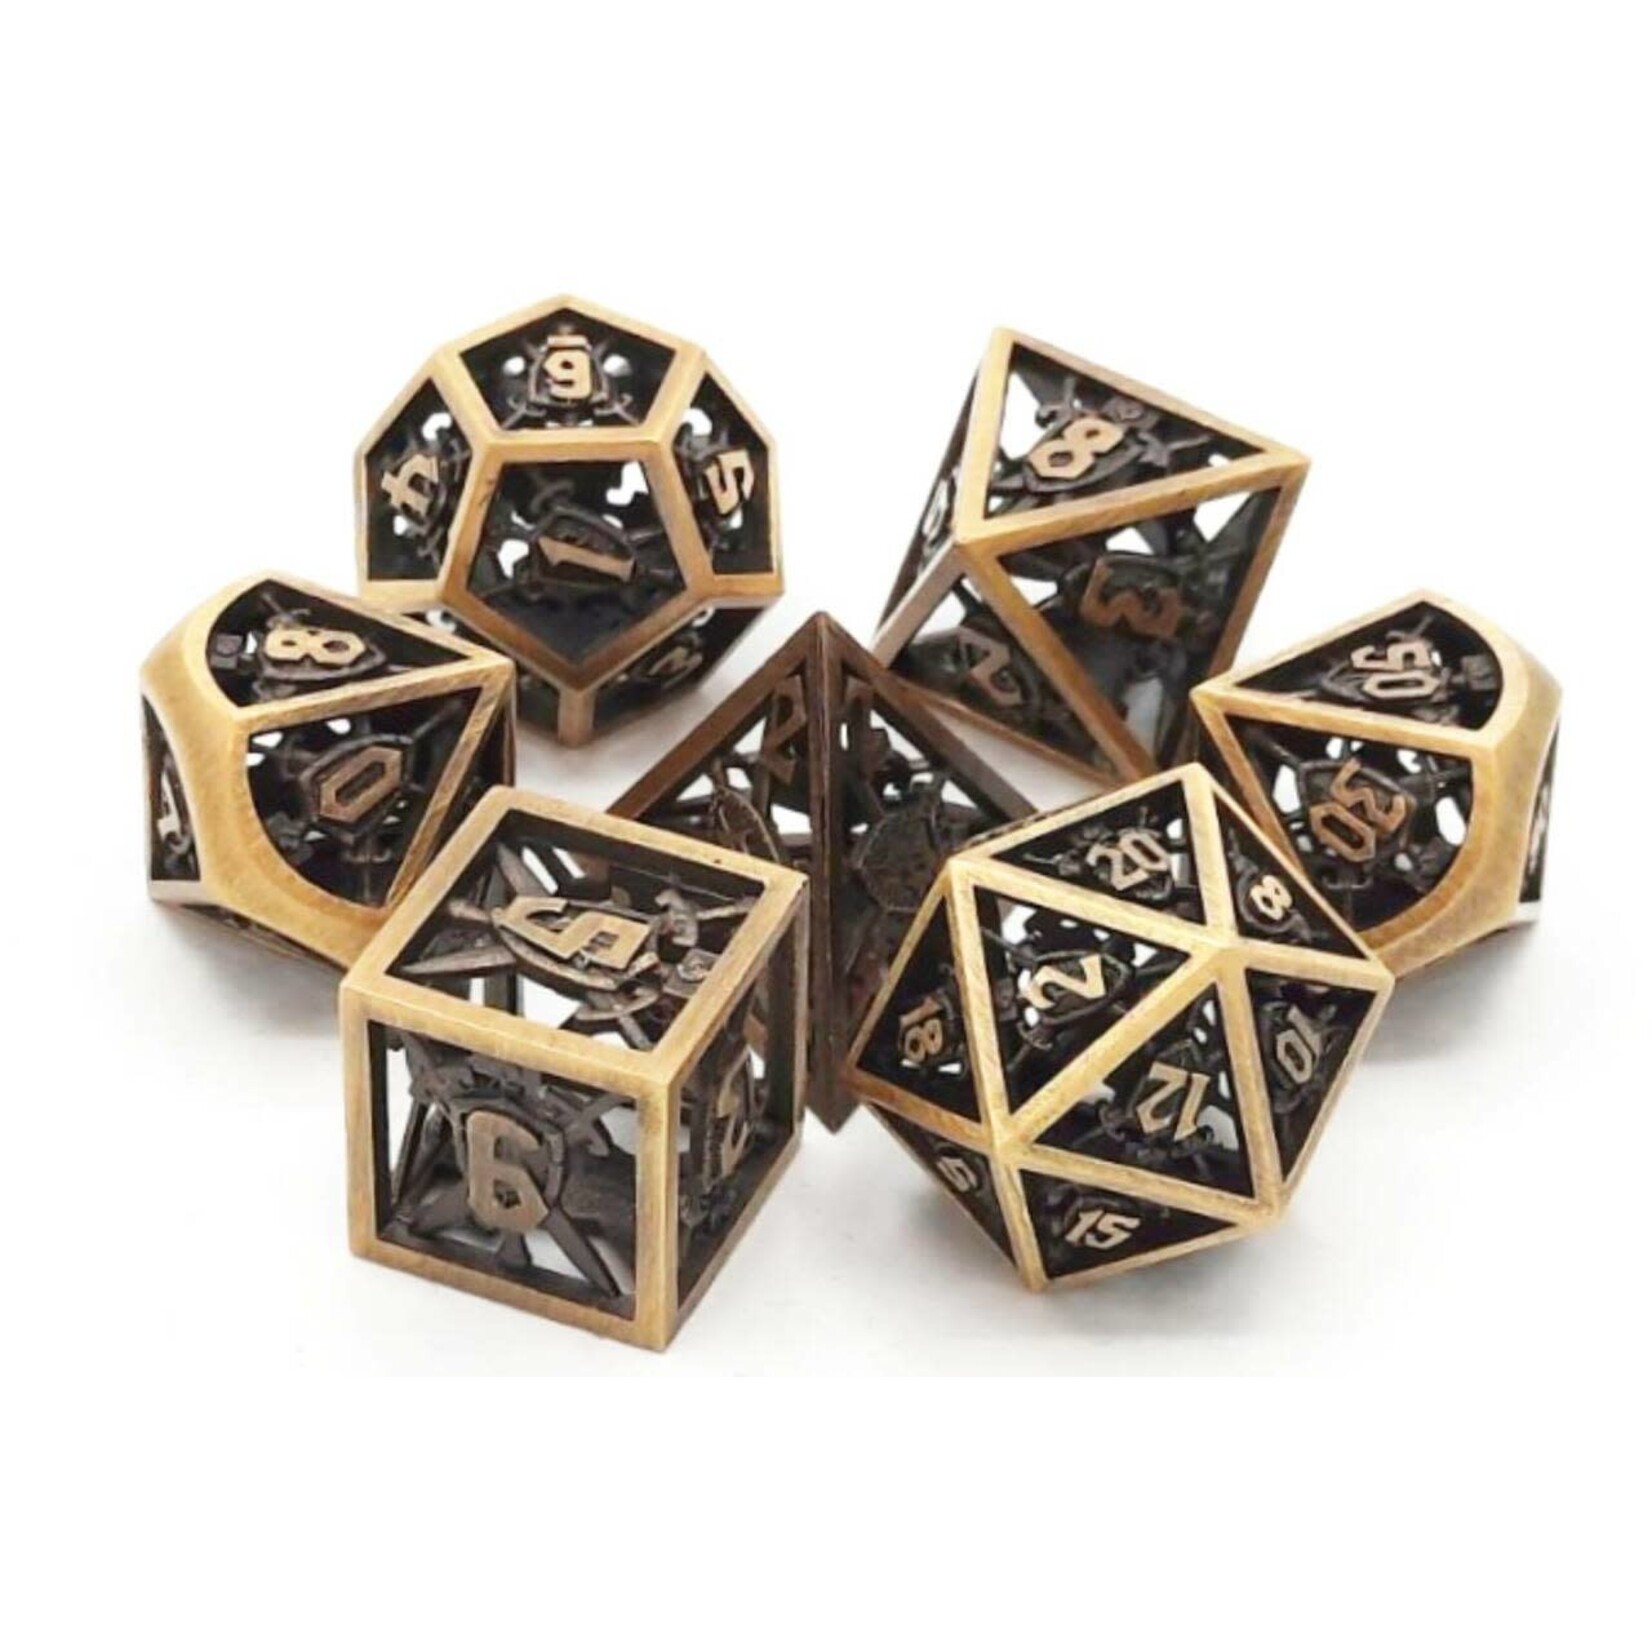 Old School Dice Old School 7 Piece DnD RPG Metal Dice Set: Hollow Sword & Shield Dice - Brushed Gold